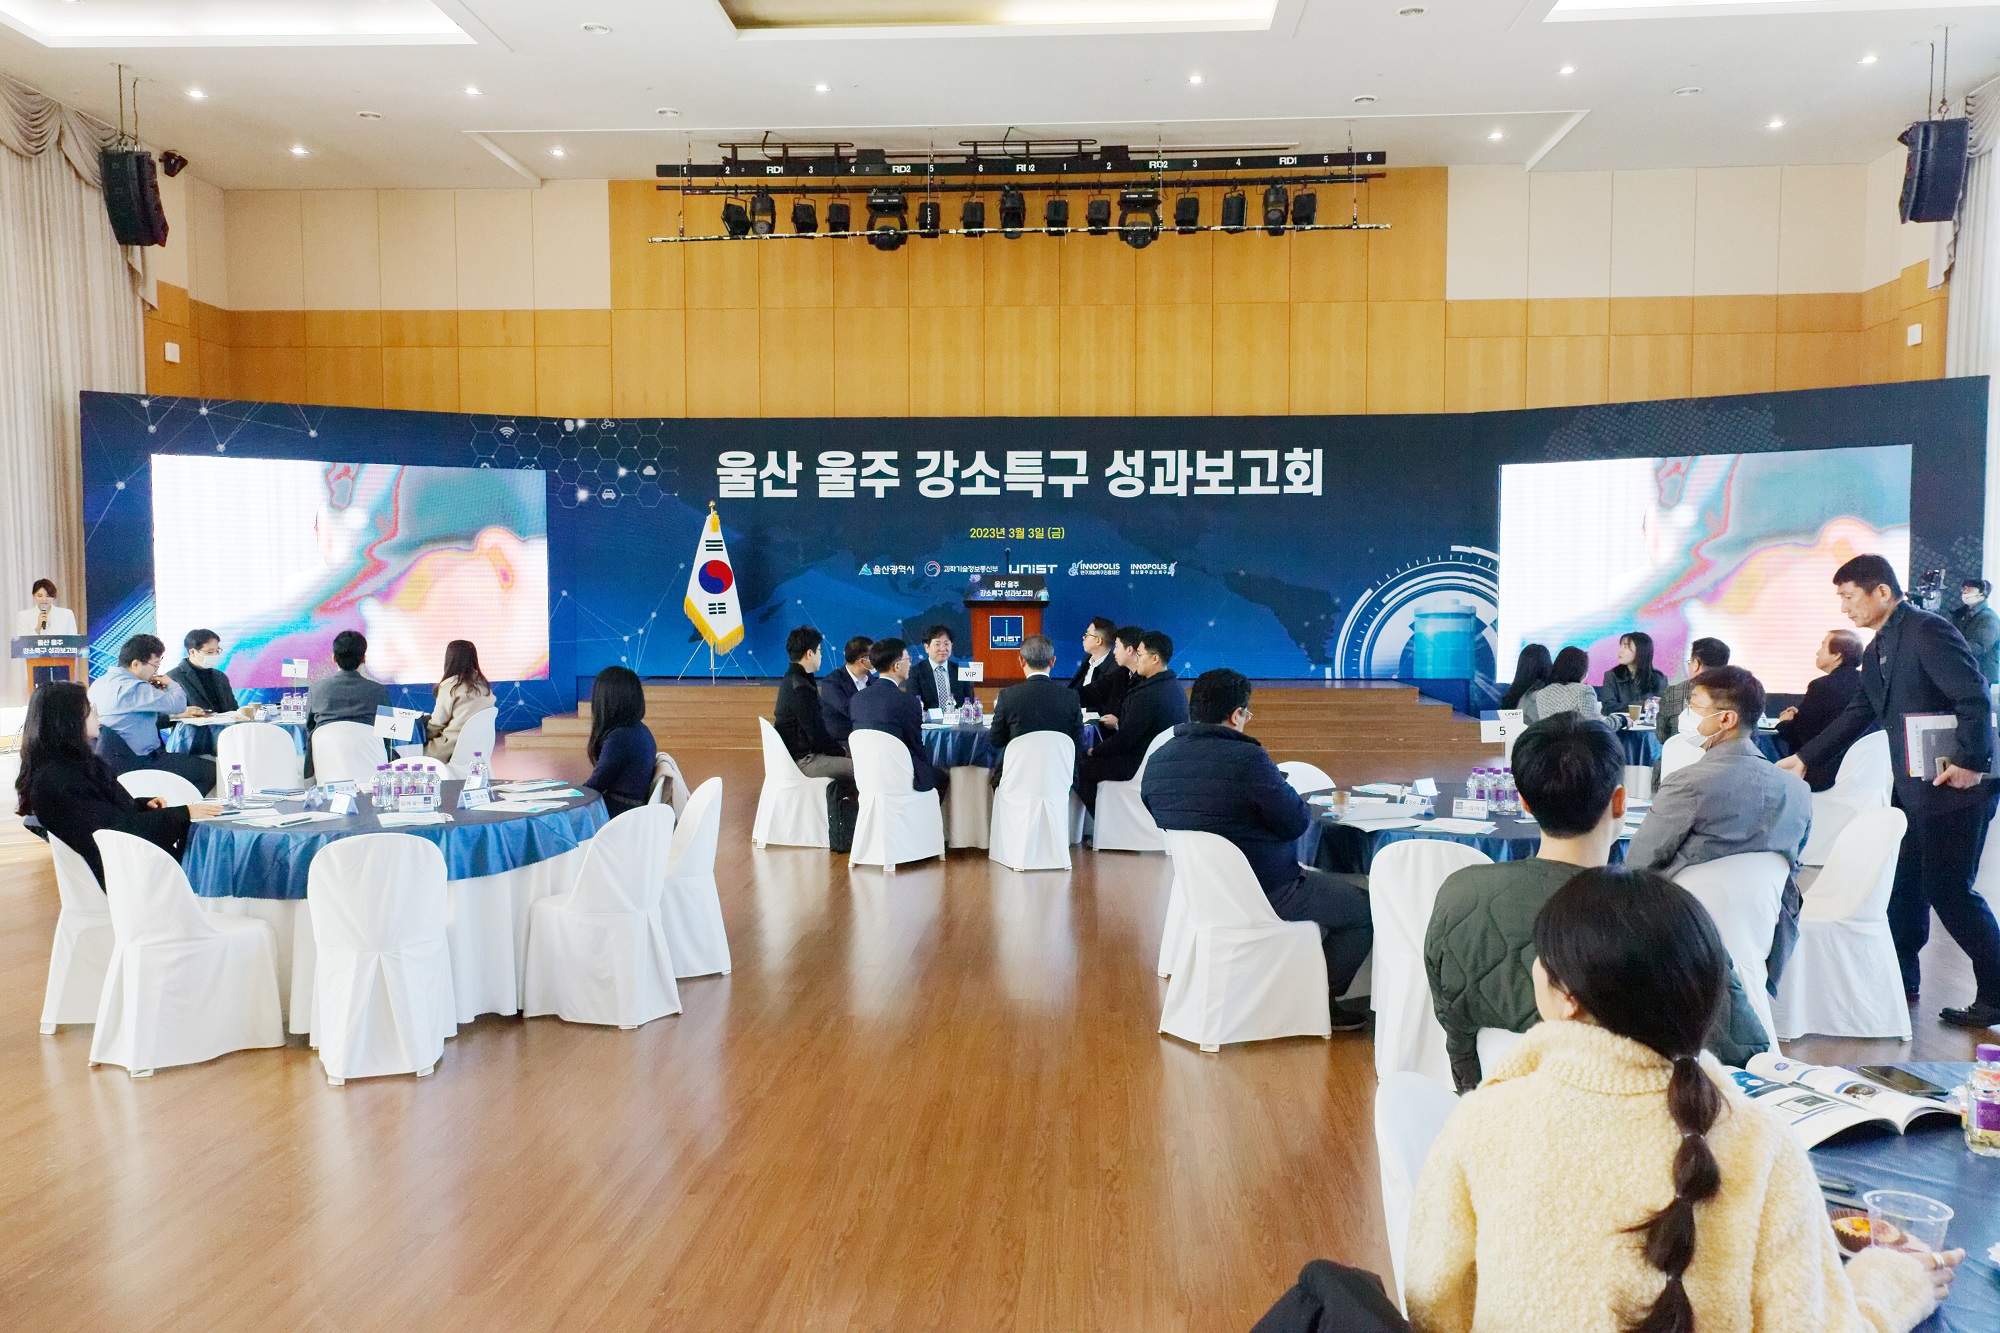 The performance presentation of the achievements of Ulsan-Ulju Strong Small R&D Special Zone took place in the Kyungdong Hall of Main Admin.istration Building at UNIST on Friday, March 3, 2023.